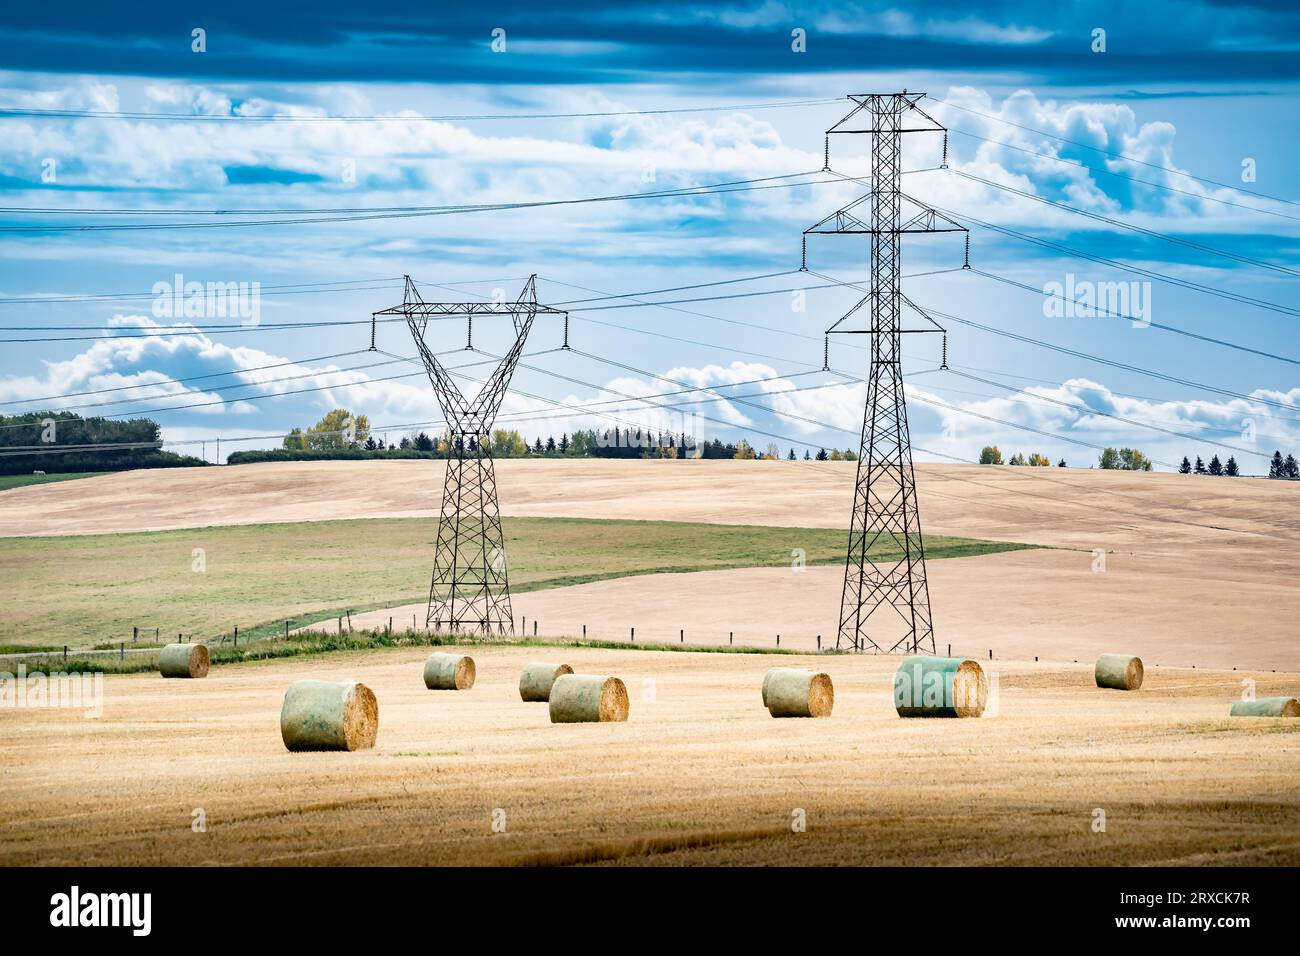 Transmission towers and power lines overlooking a farm field during fall harvest with round hay bales on the Canadian prairies in Rocky View County Al Stock Photo